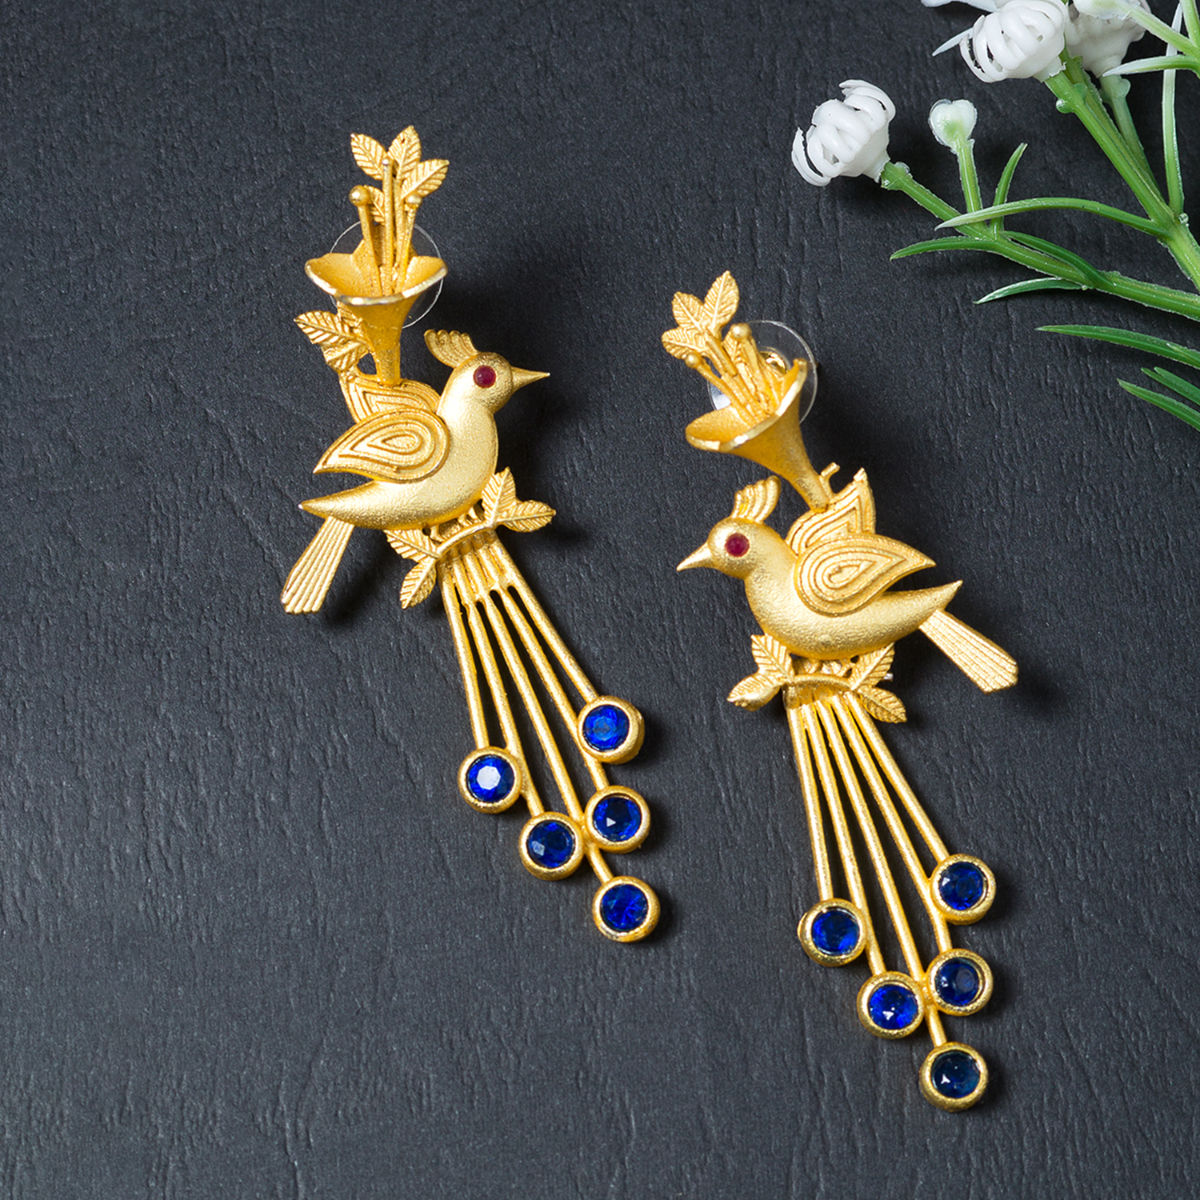 Navy blue earrings for saree Womens designer earrings at 1250  Azilaa